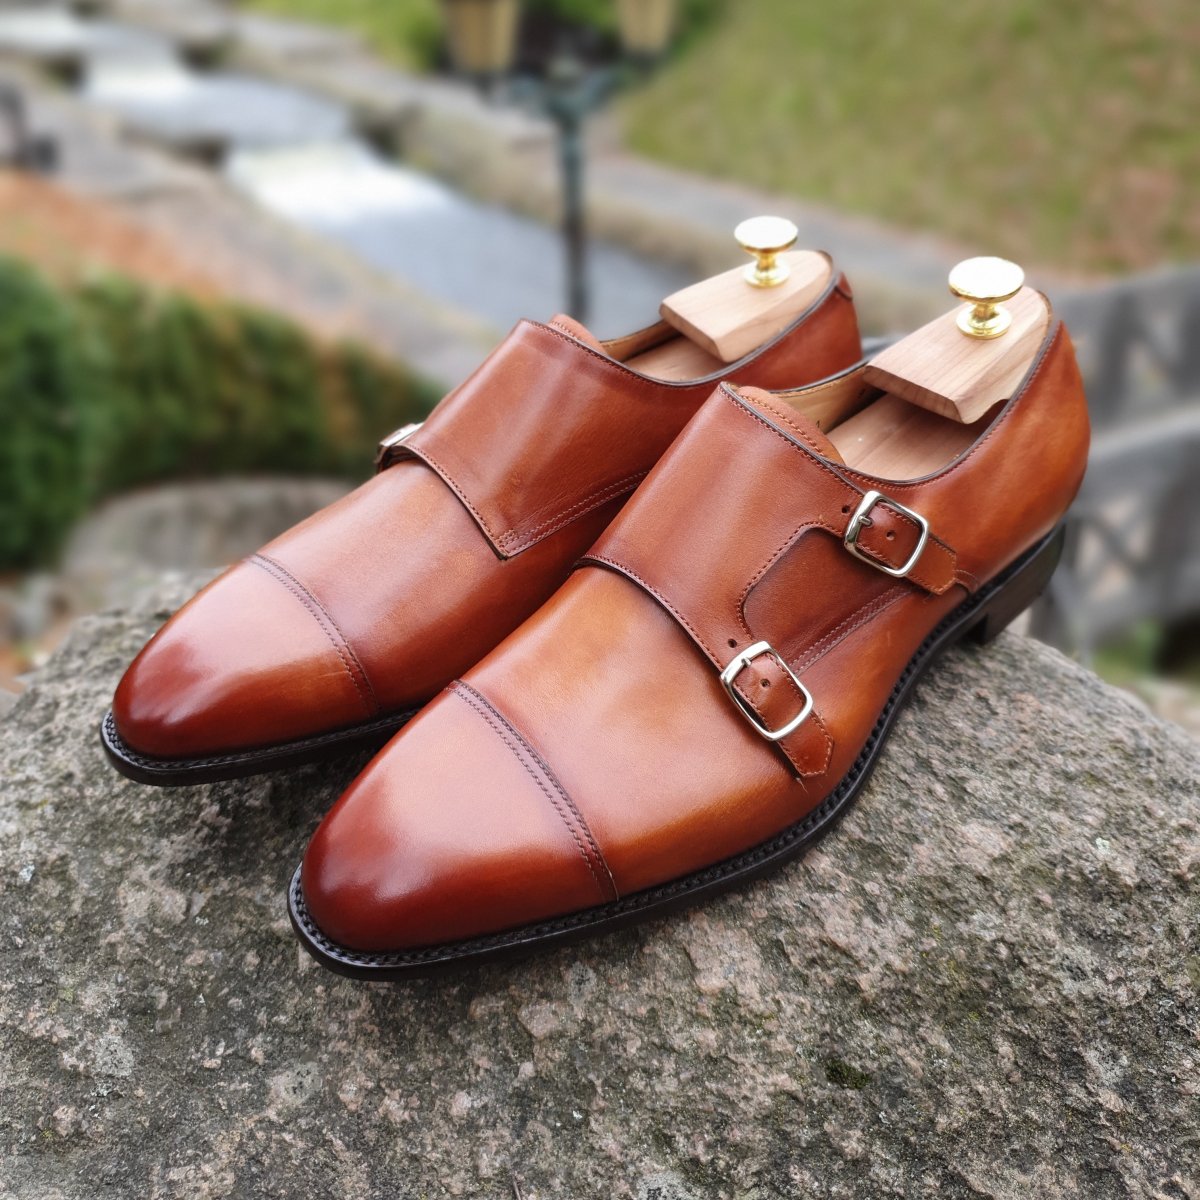 Brown monk strap shoes - top 3 shoes